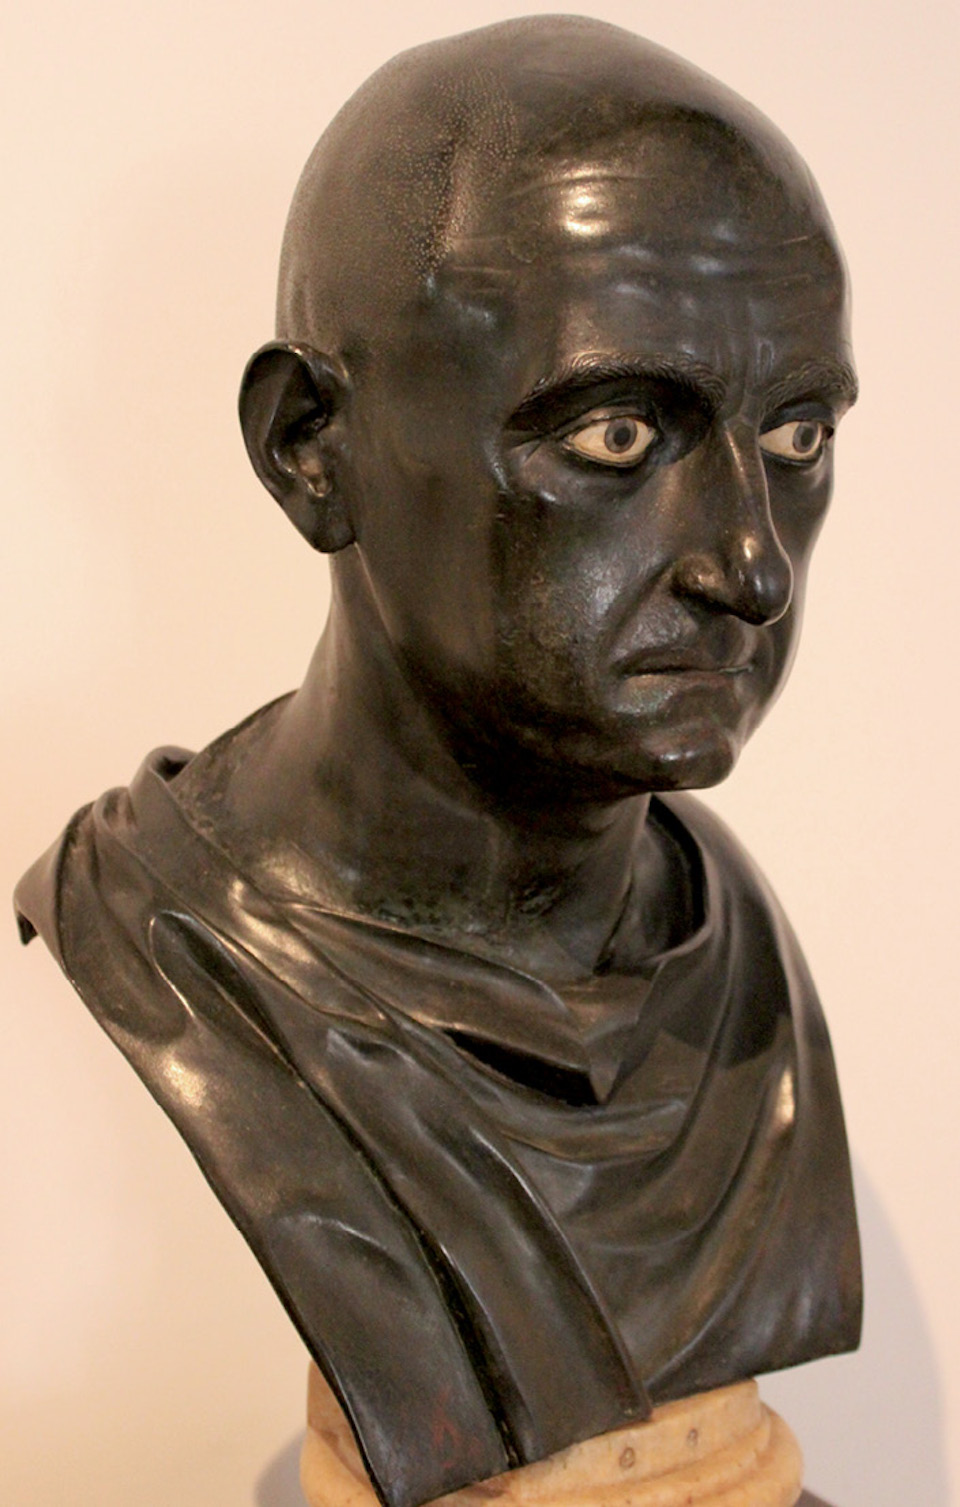 Bronze bust of Scipio Africanus in Naples National Archaeological Museum, dated mid-1st century BCE, from Villa of Papyri in Herculaneum, modern Ercolano, Italy (Courtesy Miguel Hermoso Cuesta)